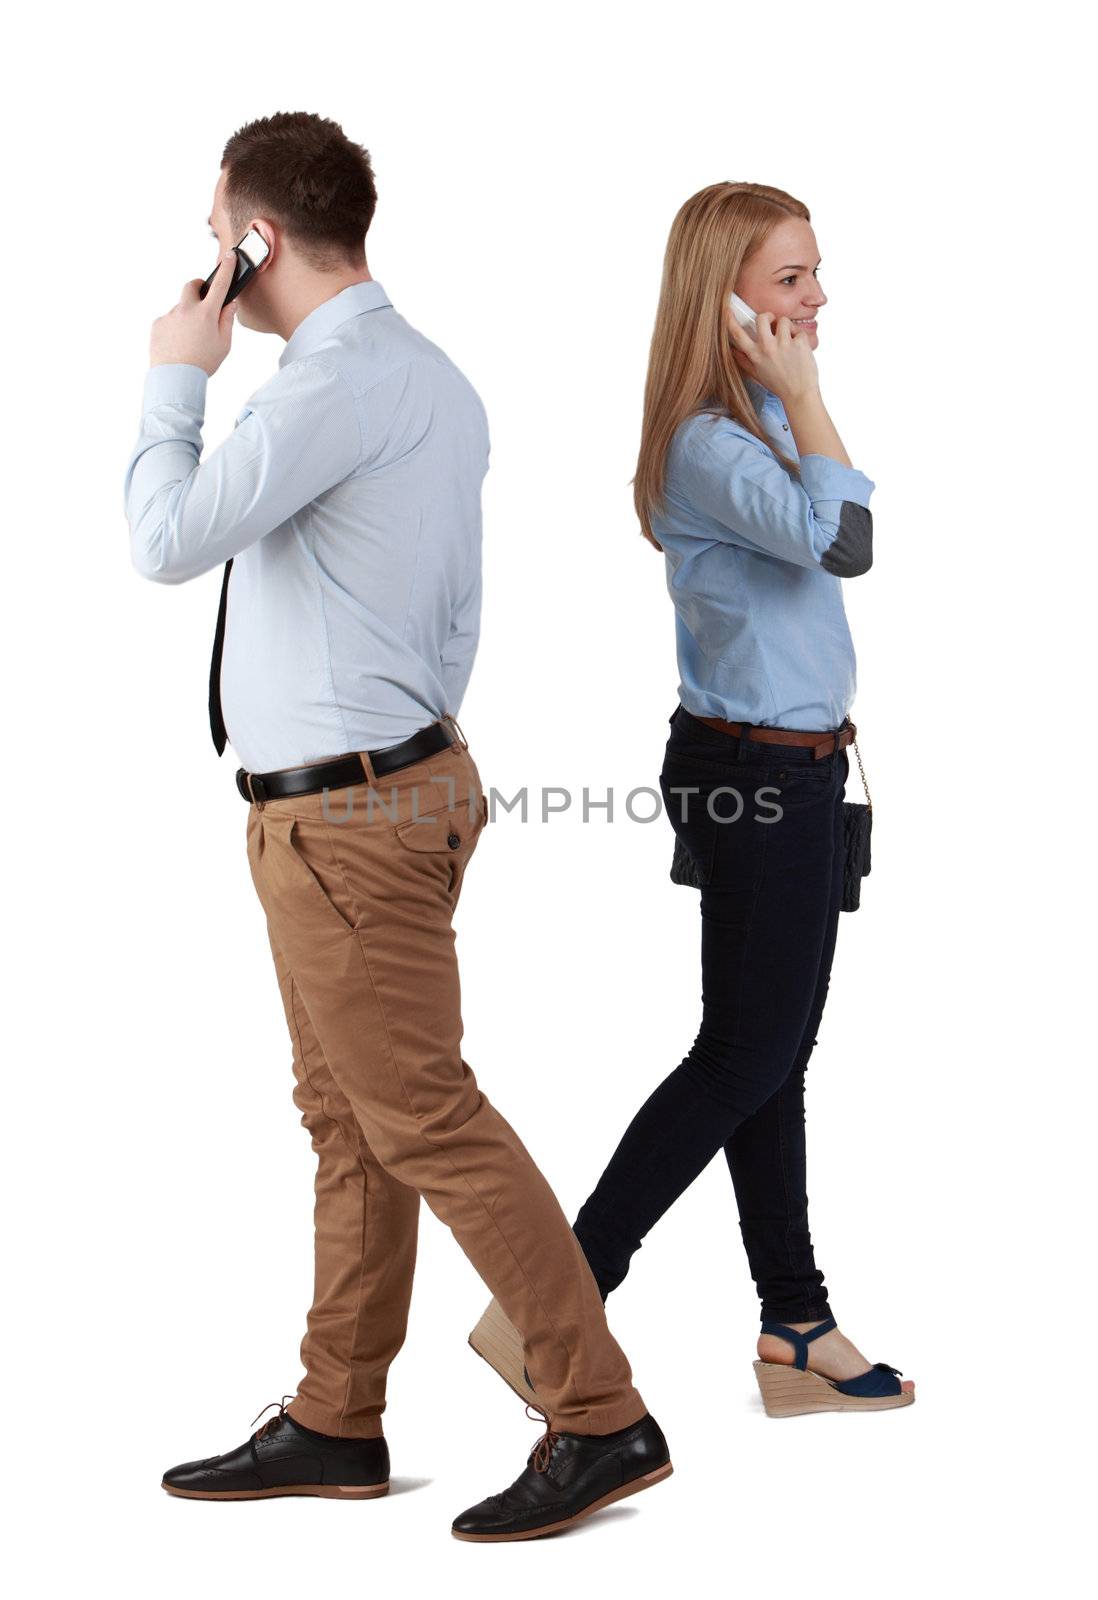 A man and a woman using mobile phones passing by themselves, against a white background.